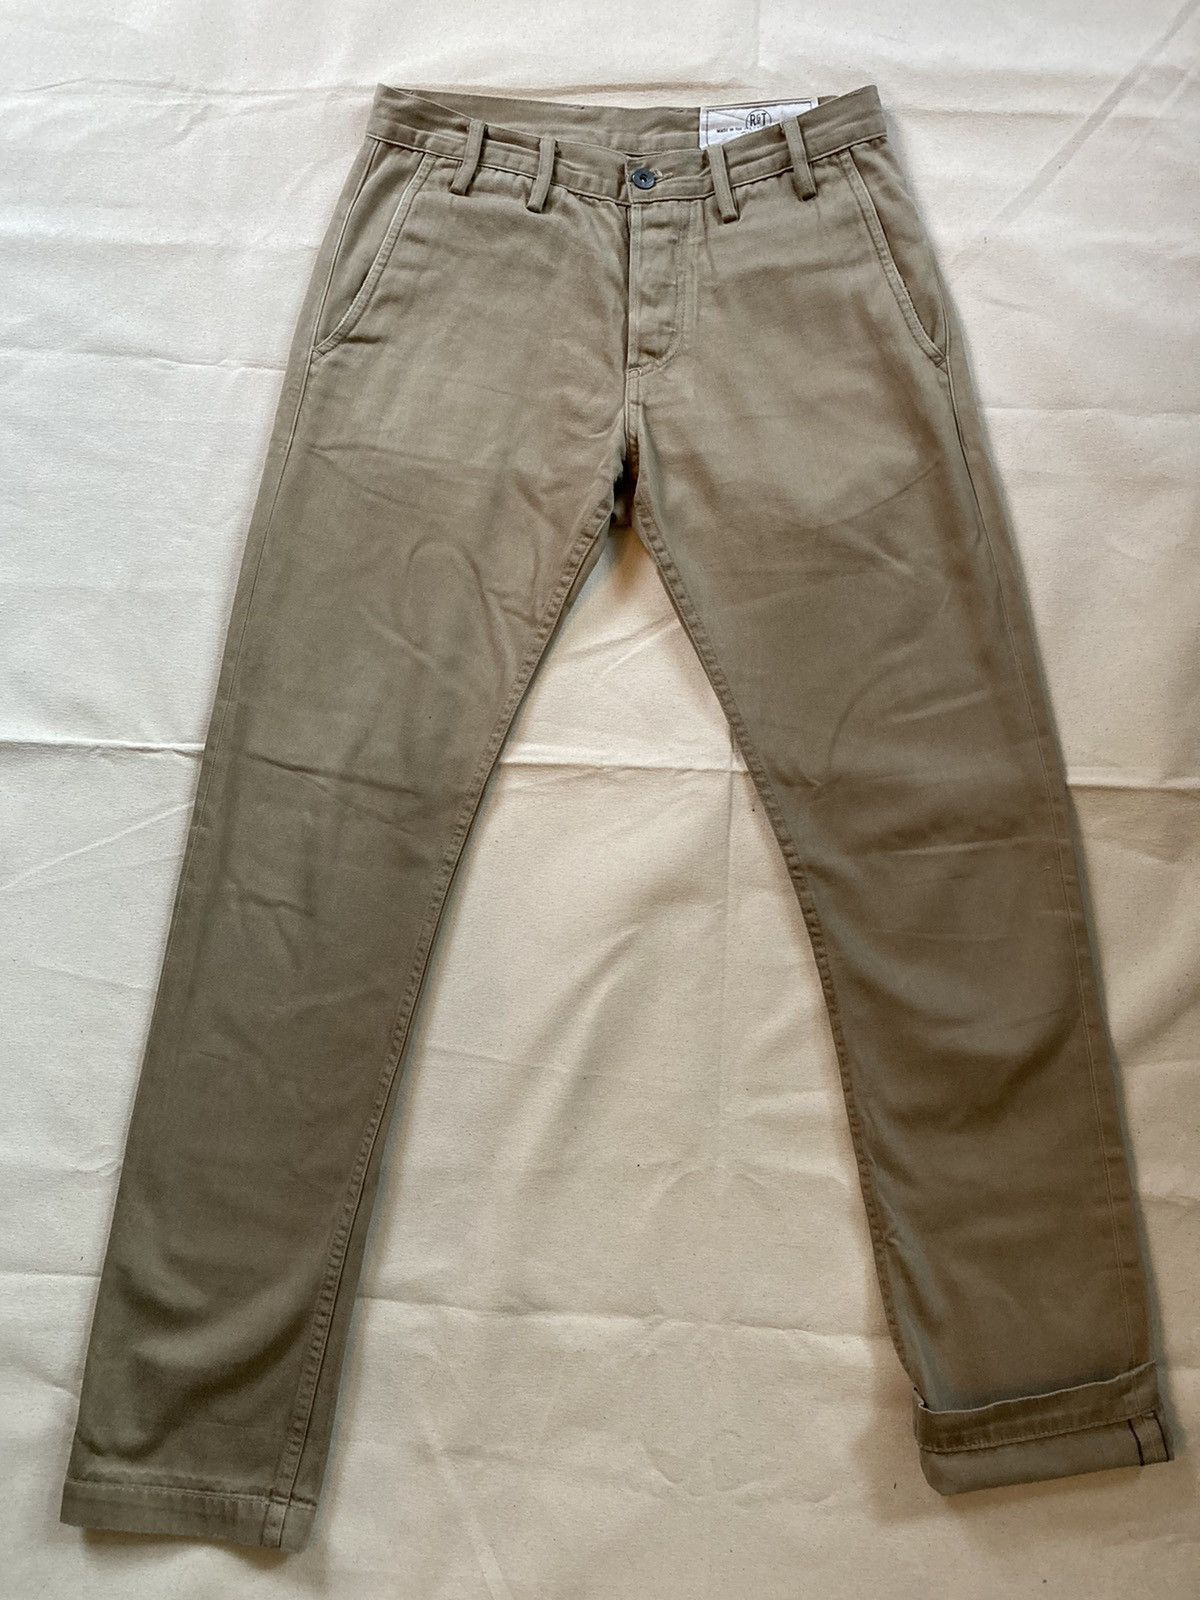 Rogue Territory Rogue Territory Officer Trouser Bronze Selvedge | Grailed